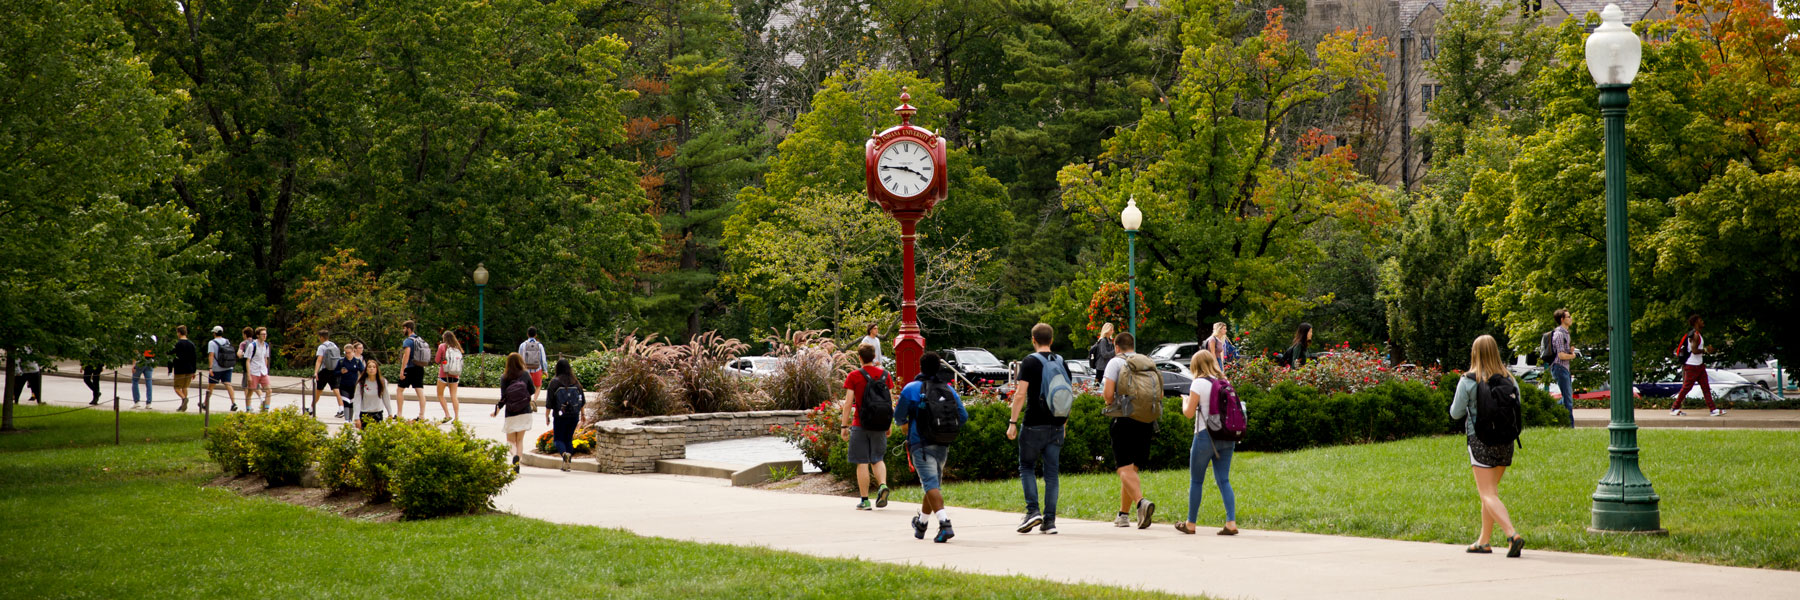 students walking on campus near an outdoor clock